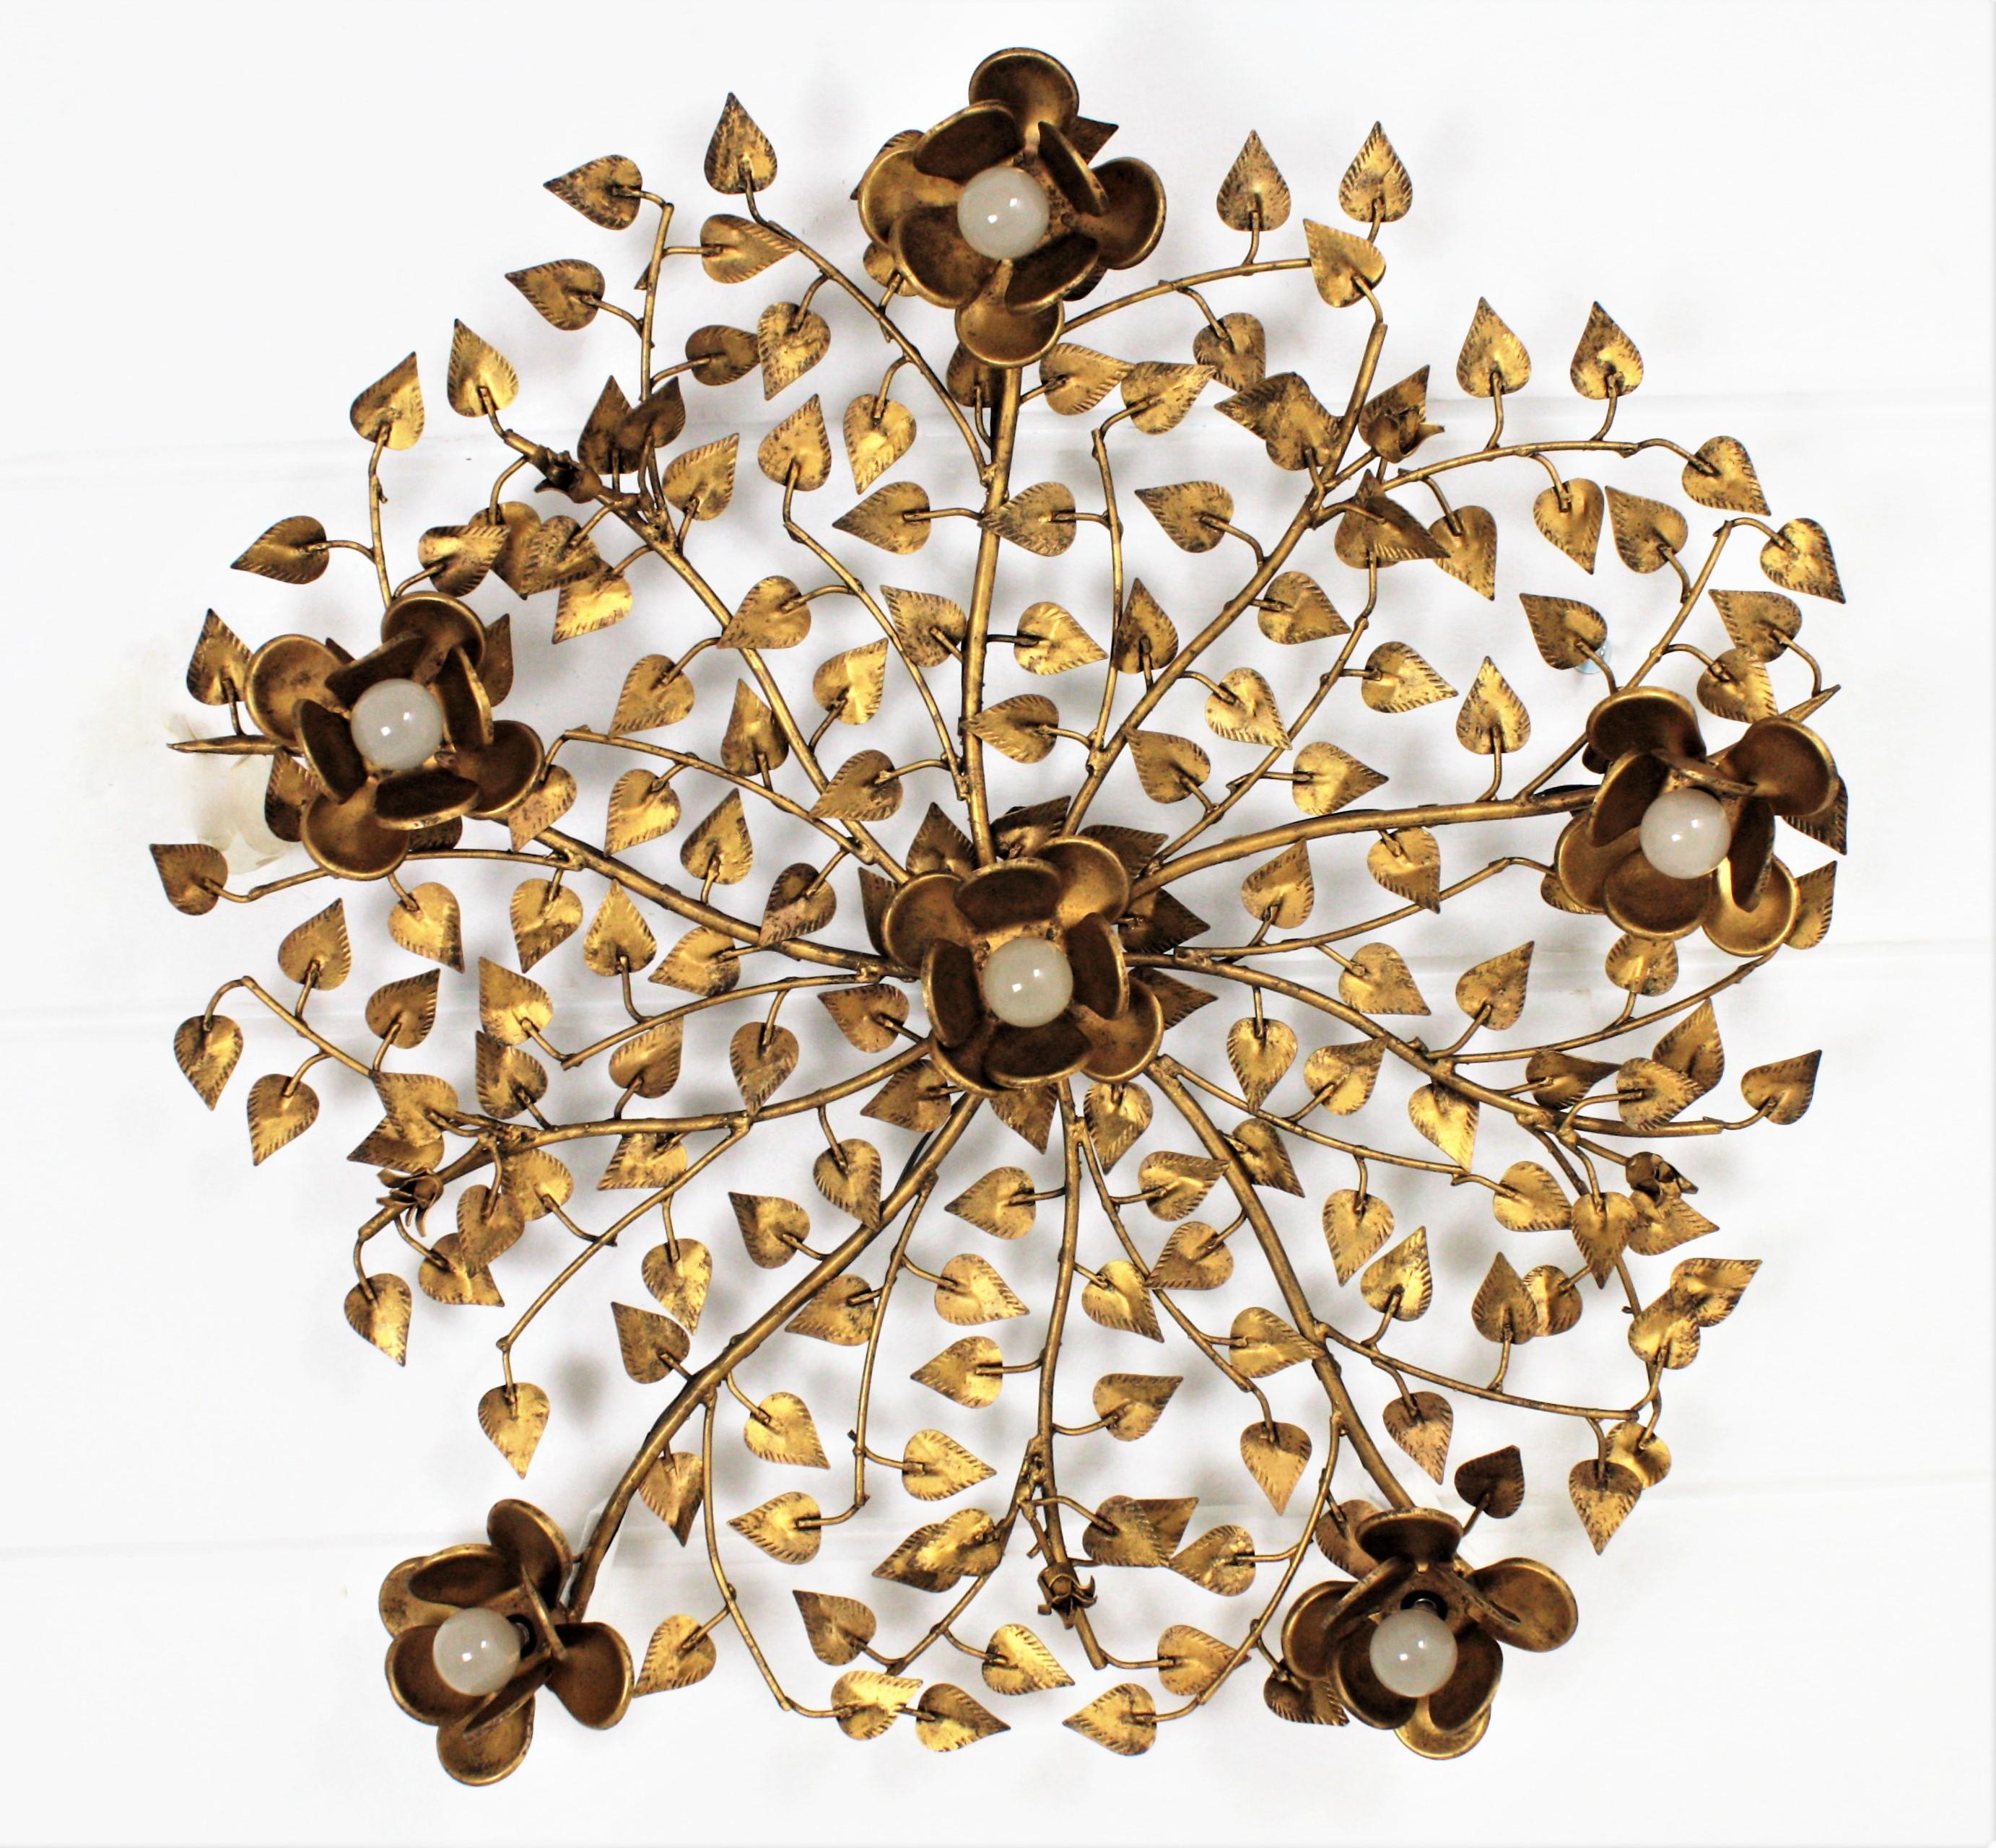 Outstanding large size hand-hammered gilt iron foliate flower bush ceiling light fixture with five flower lights. Spain, 1960s.
This ceiling light fixture was entirely made by hand. It features an intrincate of branches and leaves accented by 5